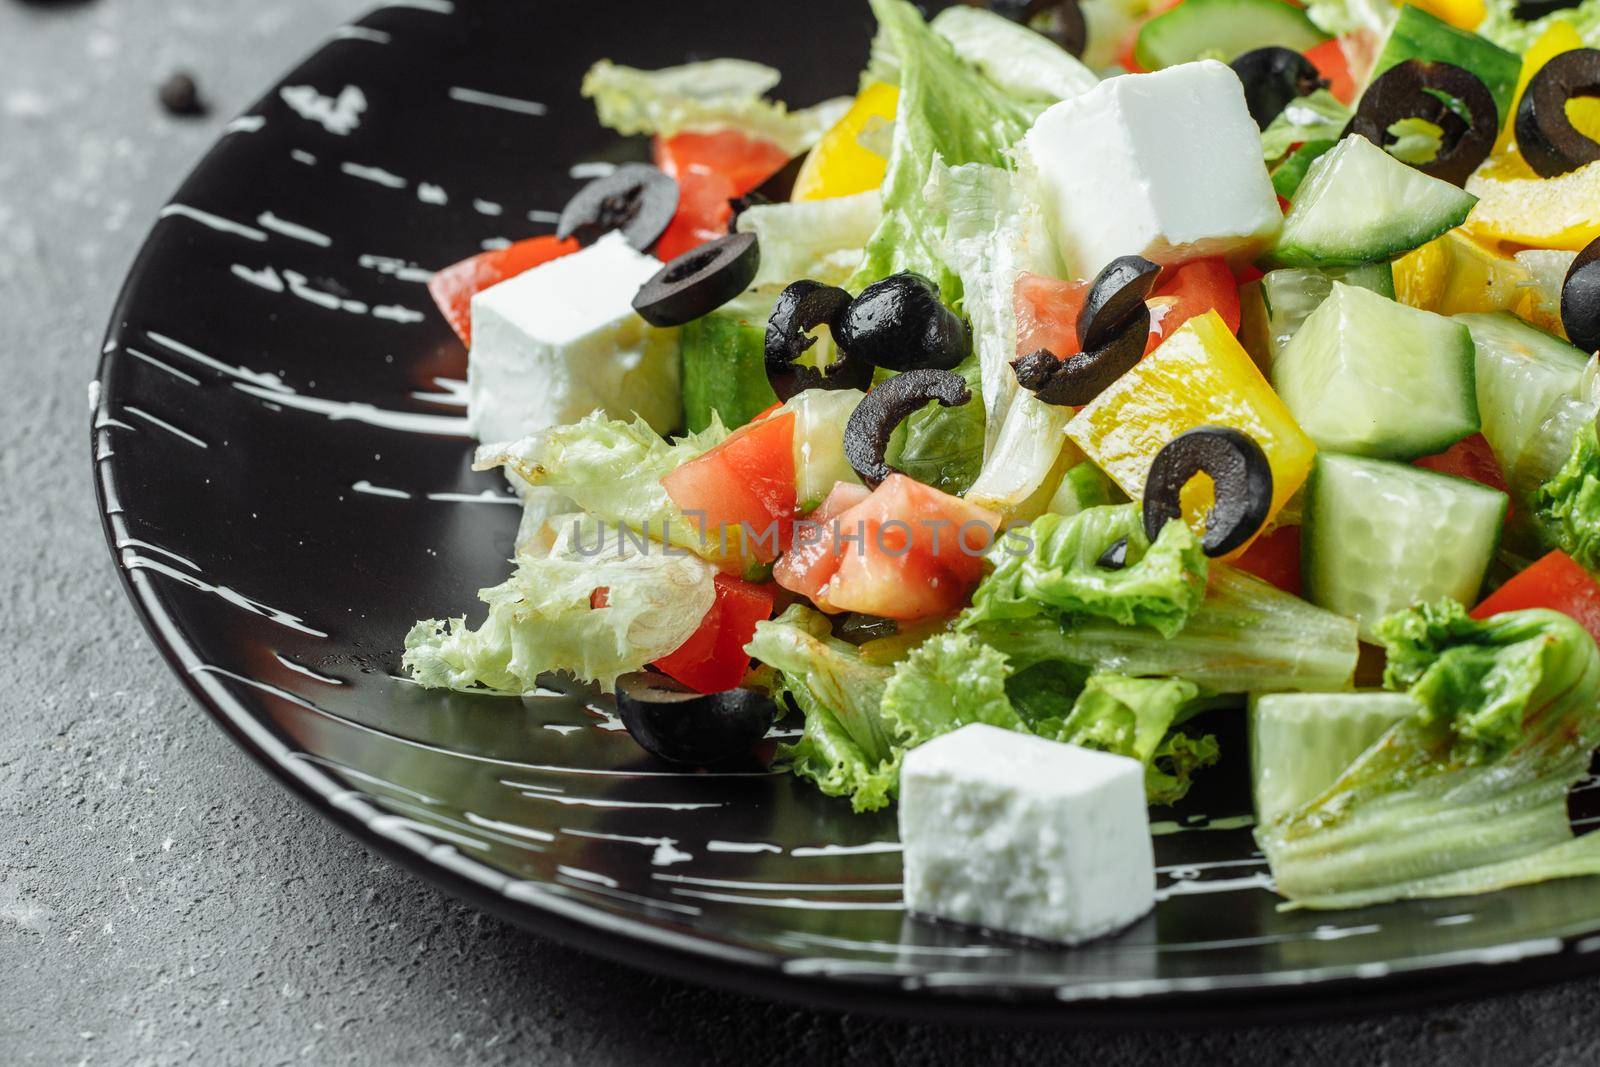 Greek Salad with Cucumeber, Kalamata Olives, Feta Cheese, Juicy Cherry Tomatoes and Fresh Basil. Concept for a tasty and healthy vegetarian meal by UcheaD